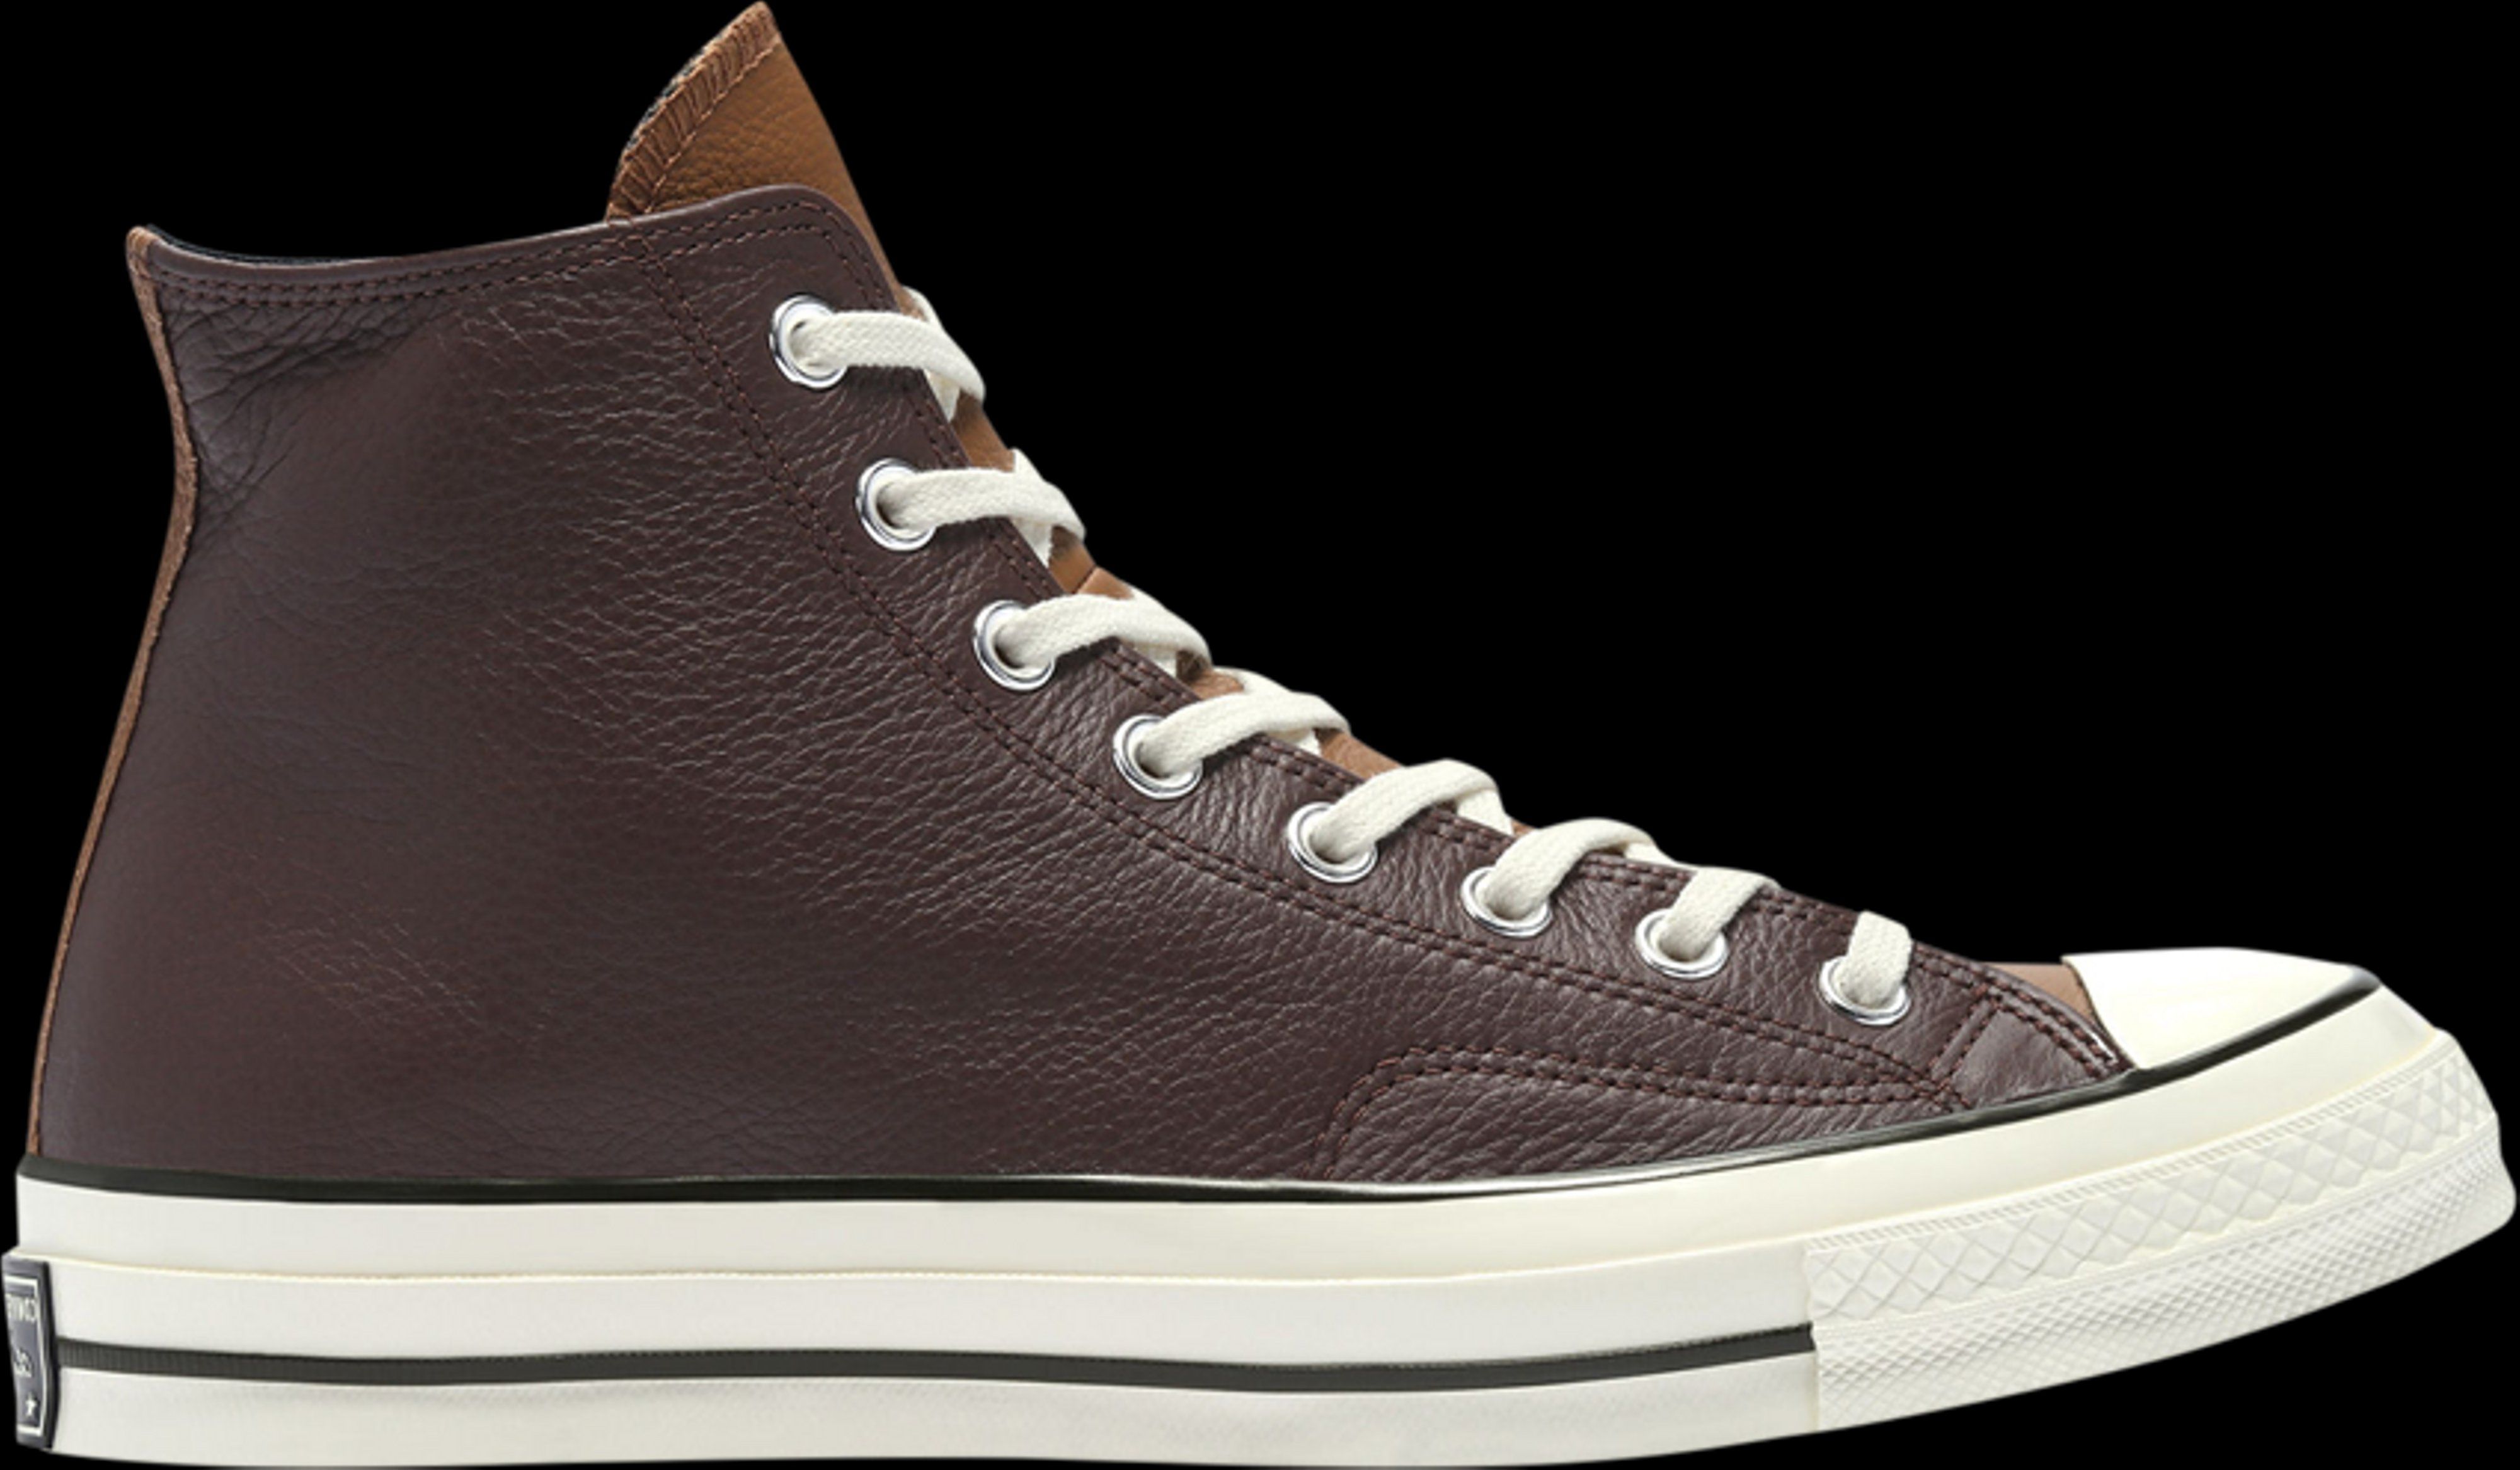 Chuck 70 Leather High 'Colorblock - Dark Root Brown' | GOAT